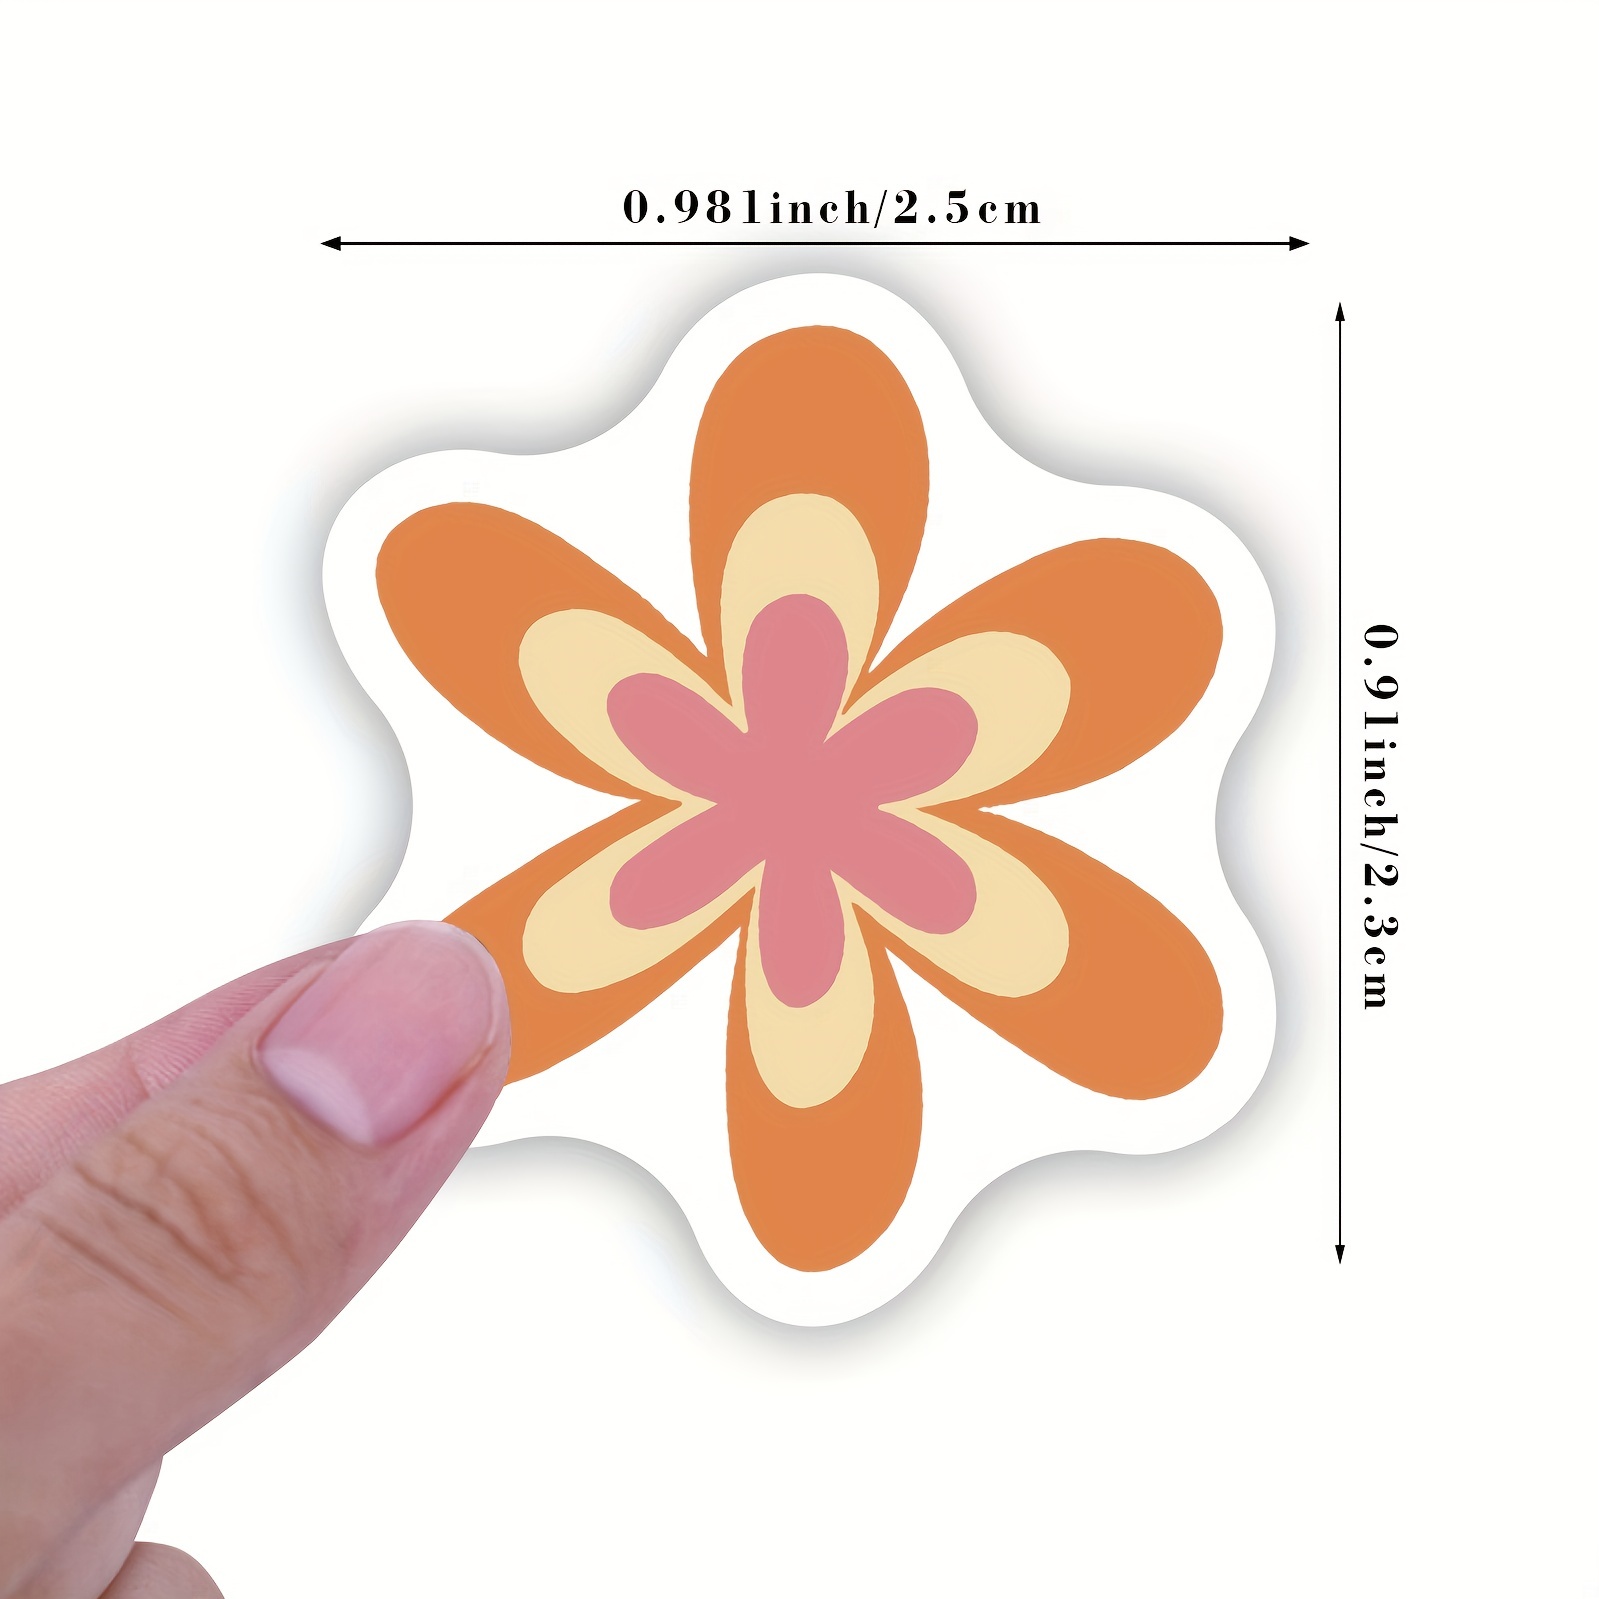 AWEELON 1200 PCS Boho Daisy Stickers Hippie Groovy Stickers Retro Flowers  Self-Adhesive Decals Daisy Flowers Stickers 60s 70s Party Favors for Kids